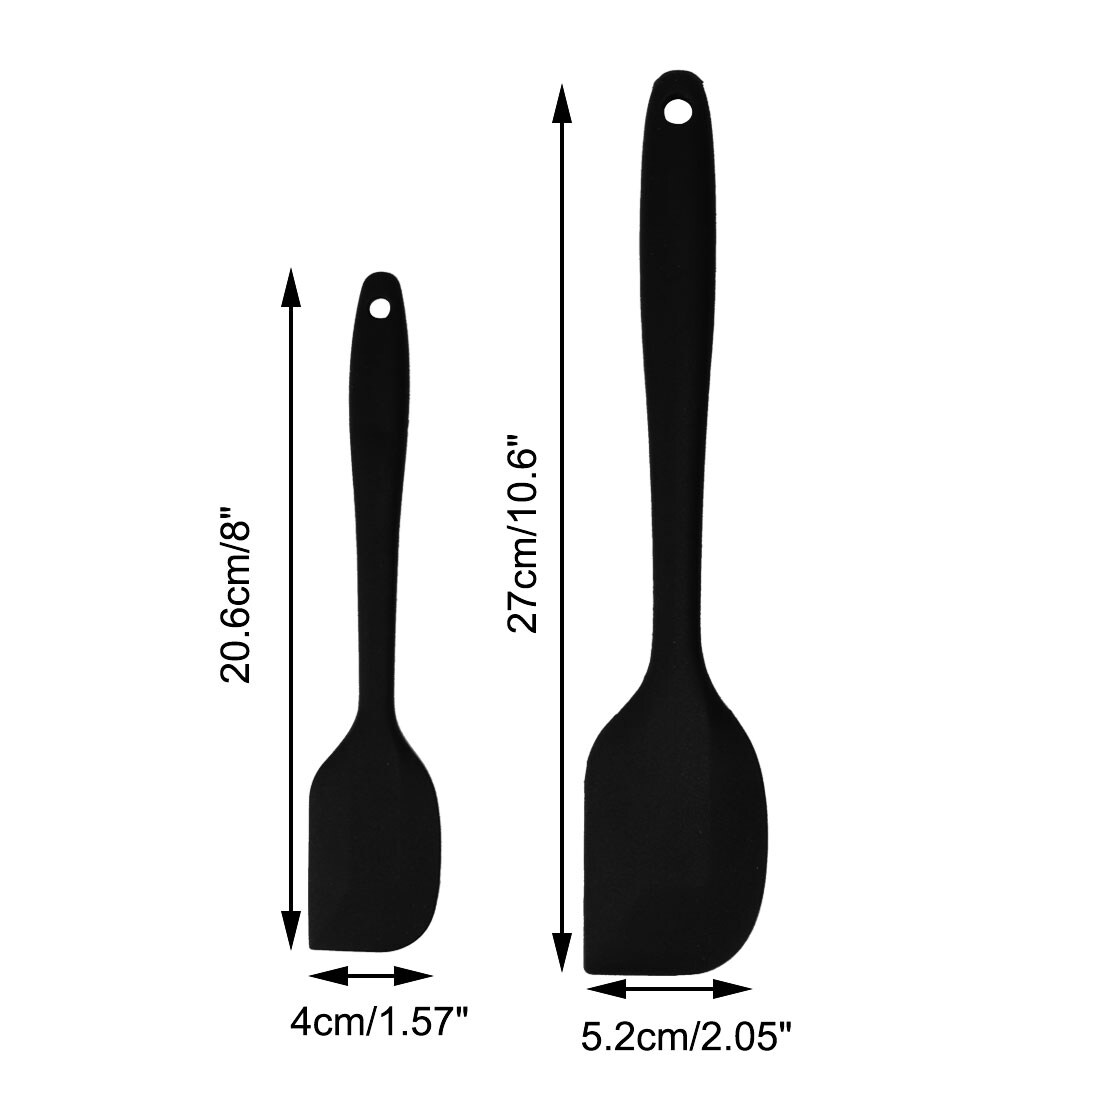 https://ak1.ostkcdn.com/images/products/is/images/direct/2655354deef09f71baaa3600ccbf4b0206595a74/4-Pcs-Silicone-Spatula-Set-Heat-Resistant-Non-Stick-for-Cooking.jpg